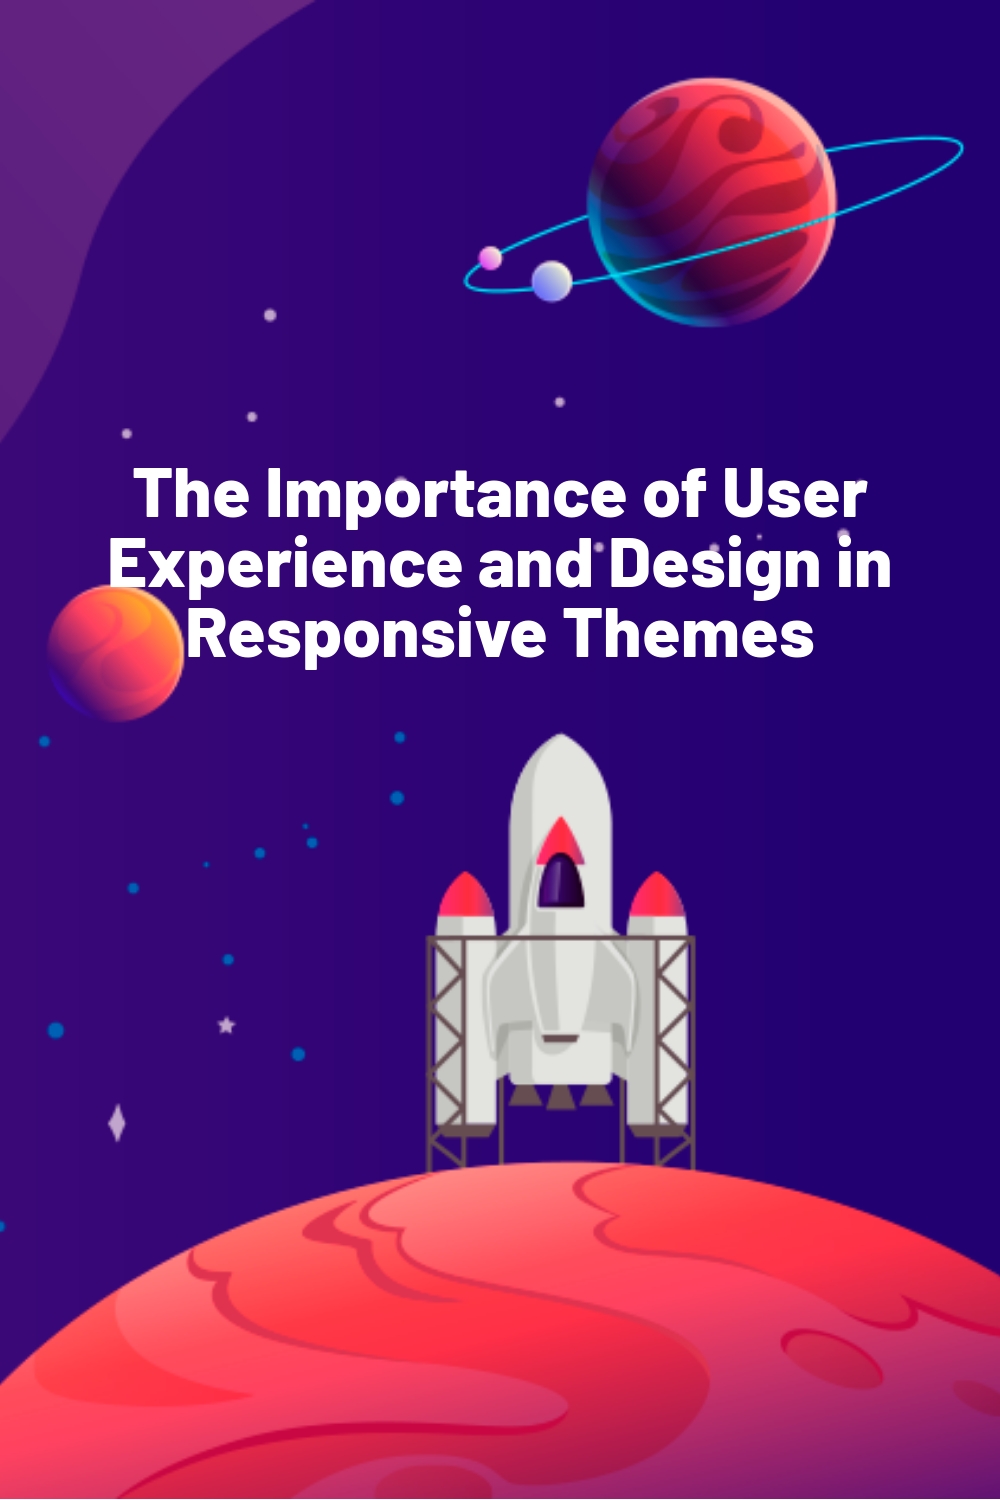 The Importance of User Experience and Design in Responsive Themes